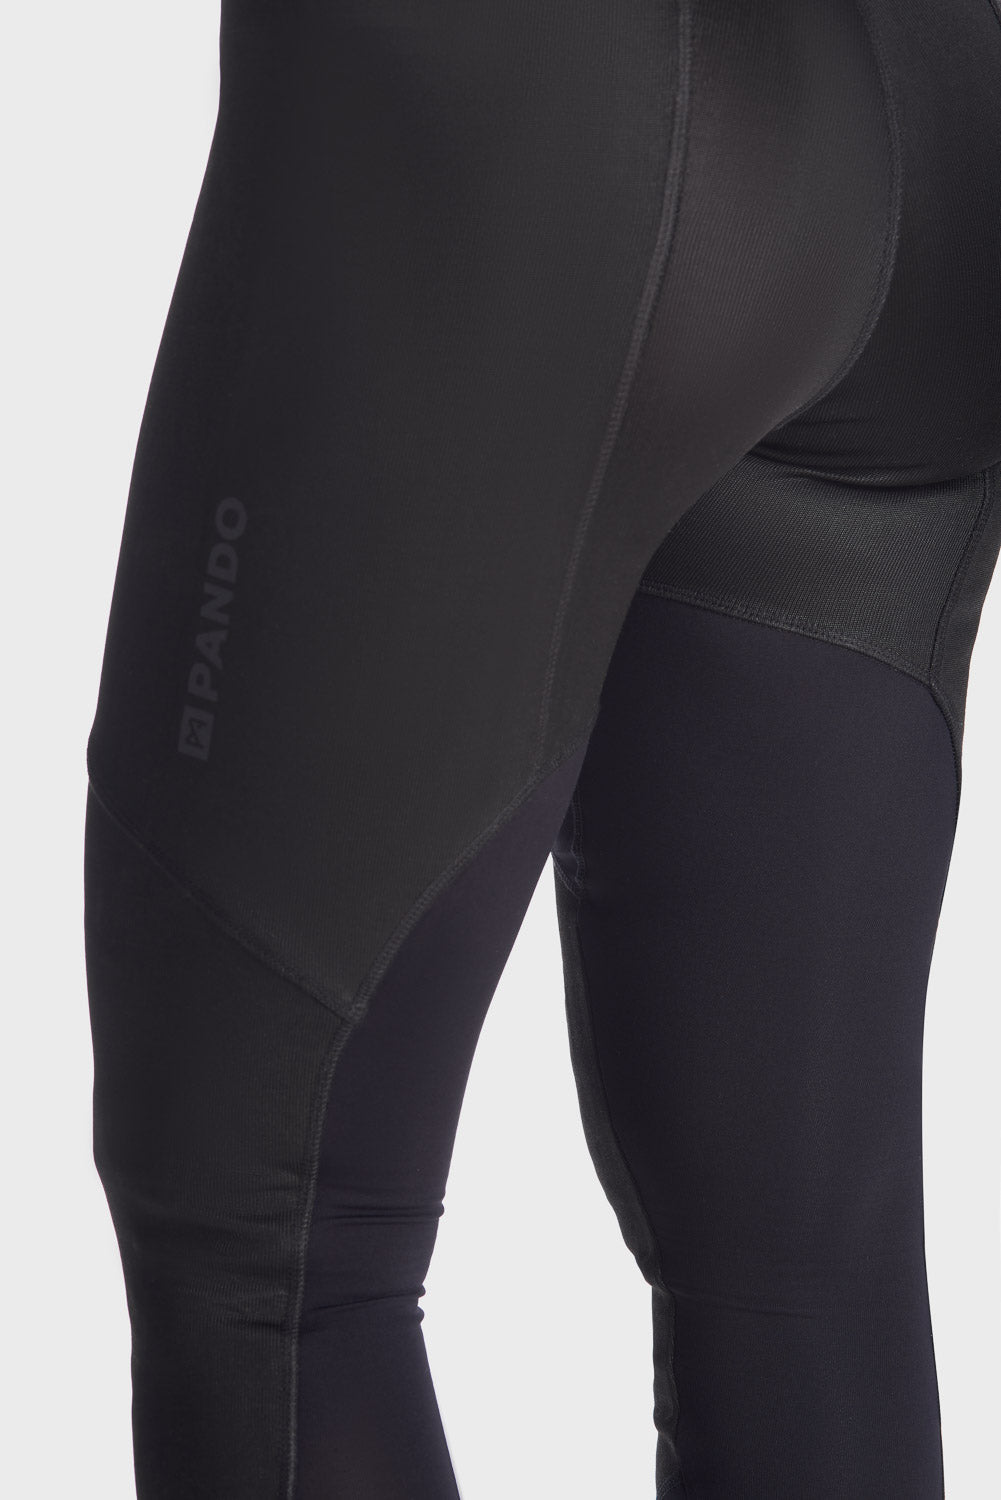 A close up of woman tighs wearing Pando Moto SKIN AAA armoured base layer leggings in black